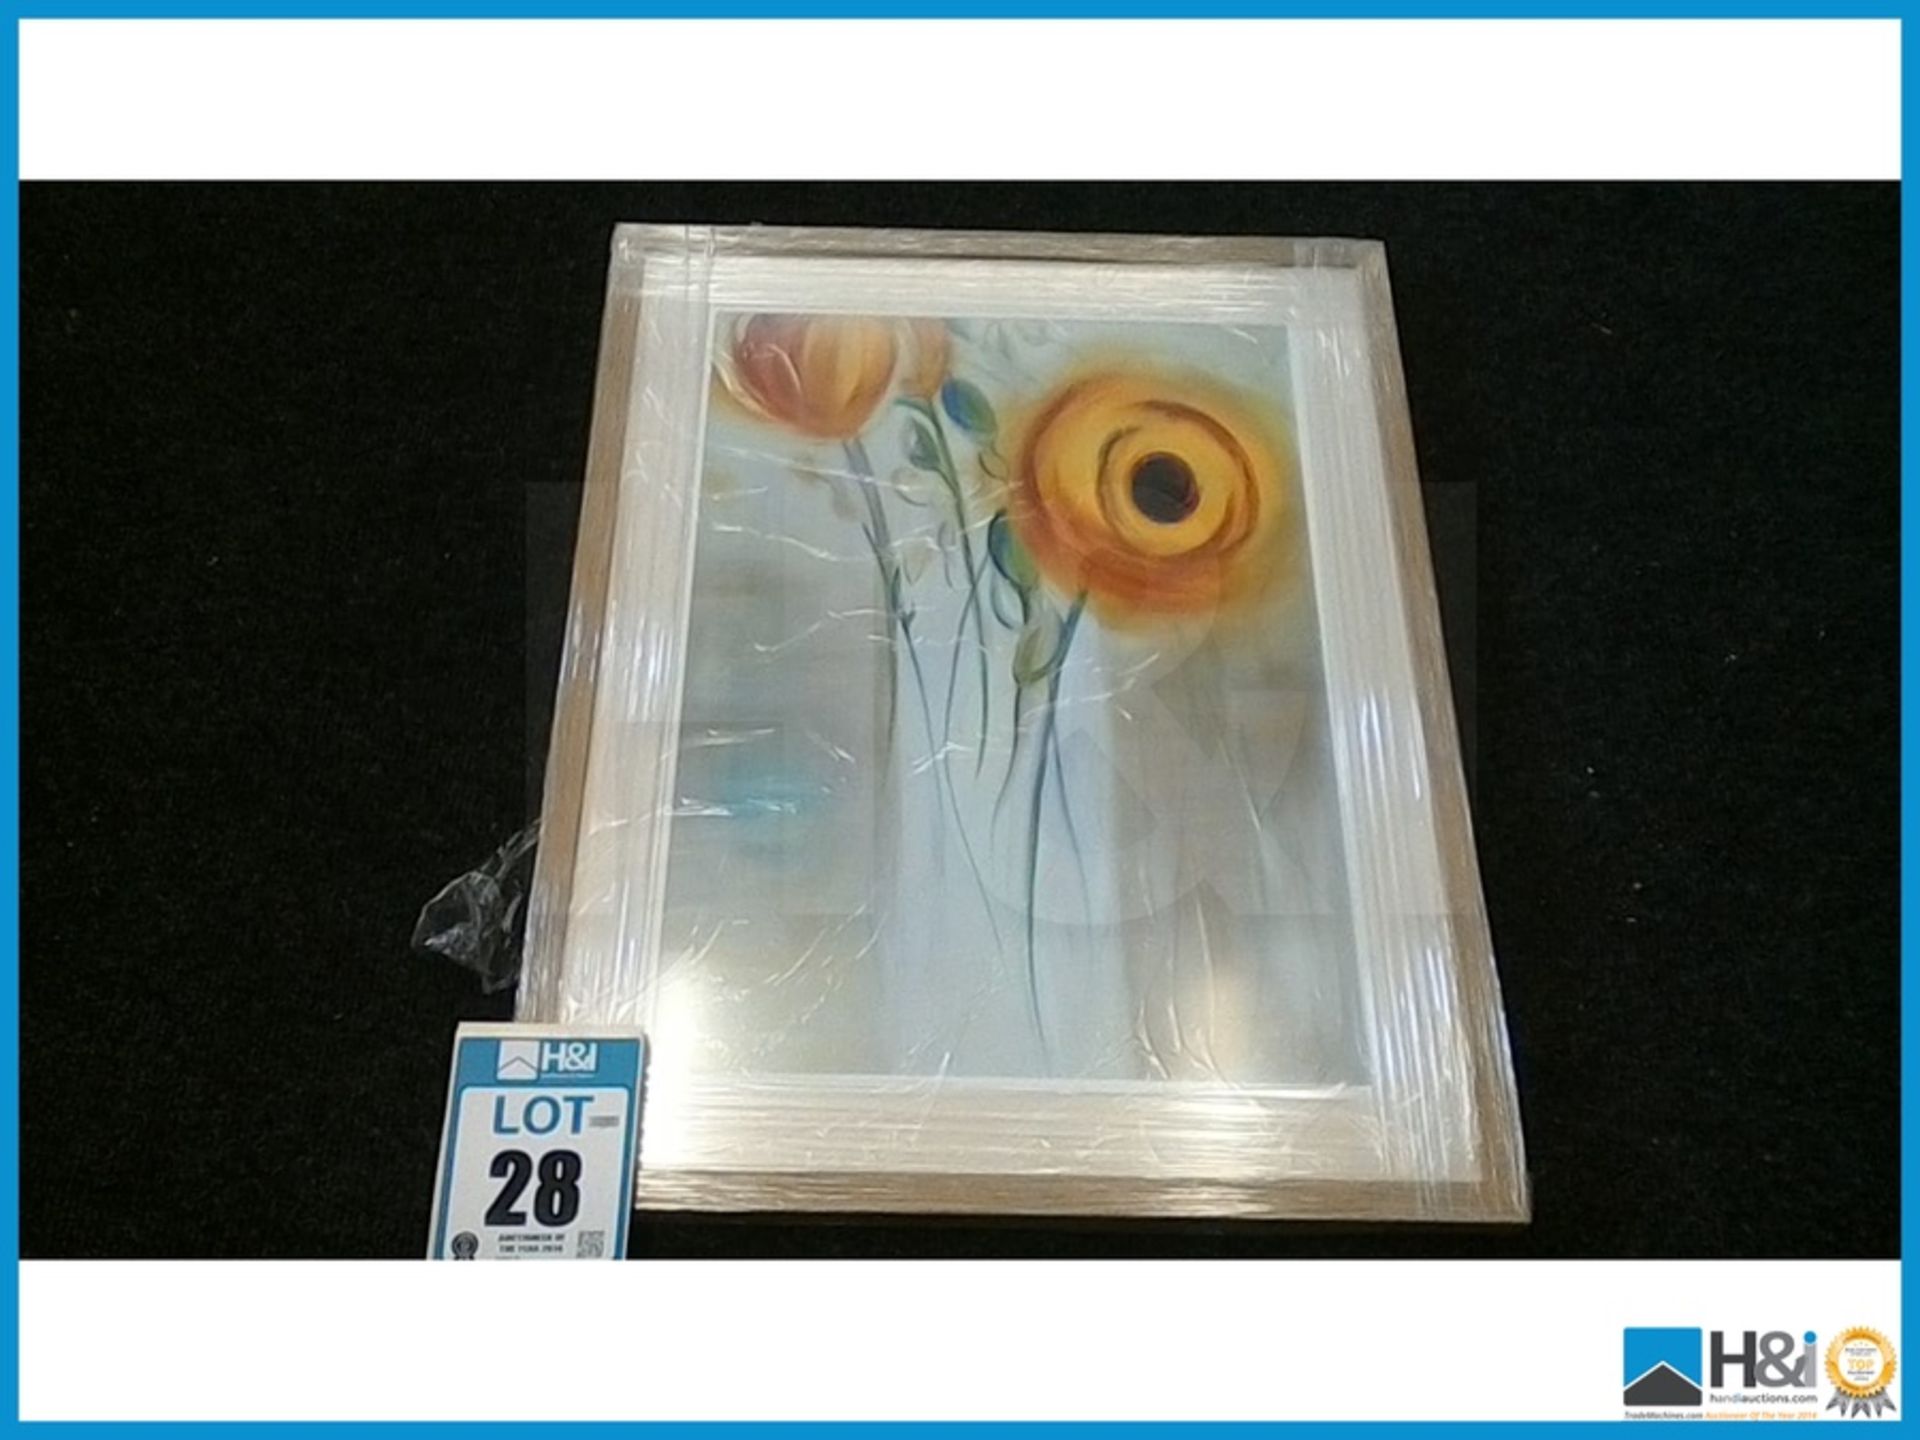 NEW DESIGNER SIMPLE OAK NATURAL FINISH FRAME DISPLAYING A ABSTRACT OF A FLOWERS DIMENSIONS: 75X60 CM